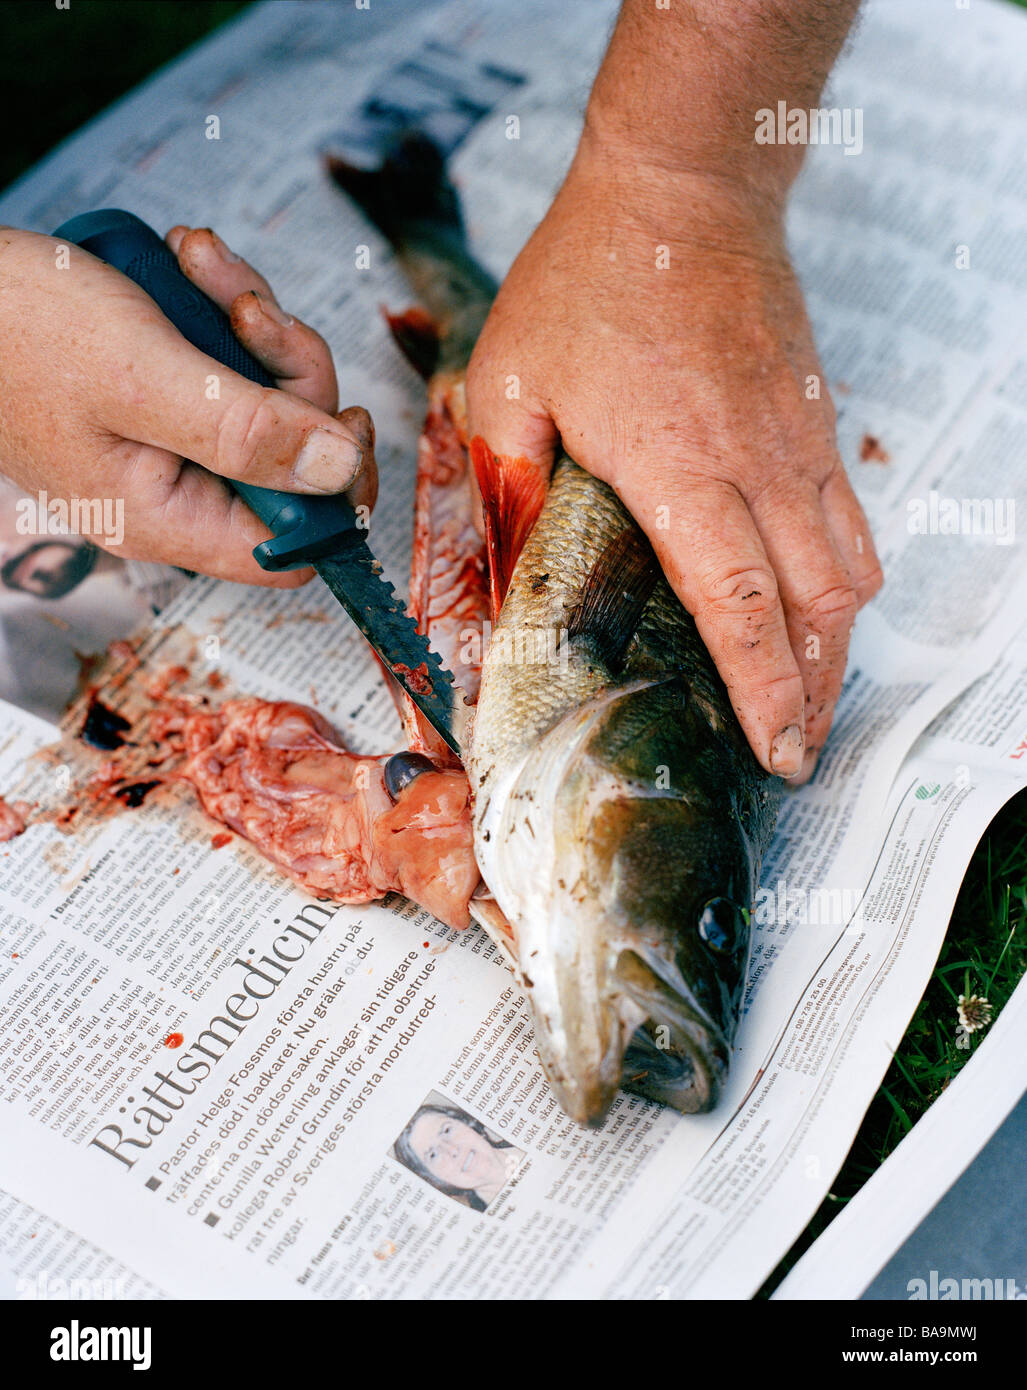 Fish being cleaned, Sweden. Stock Photo